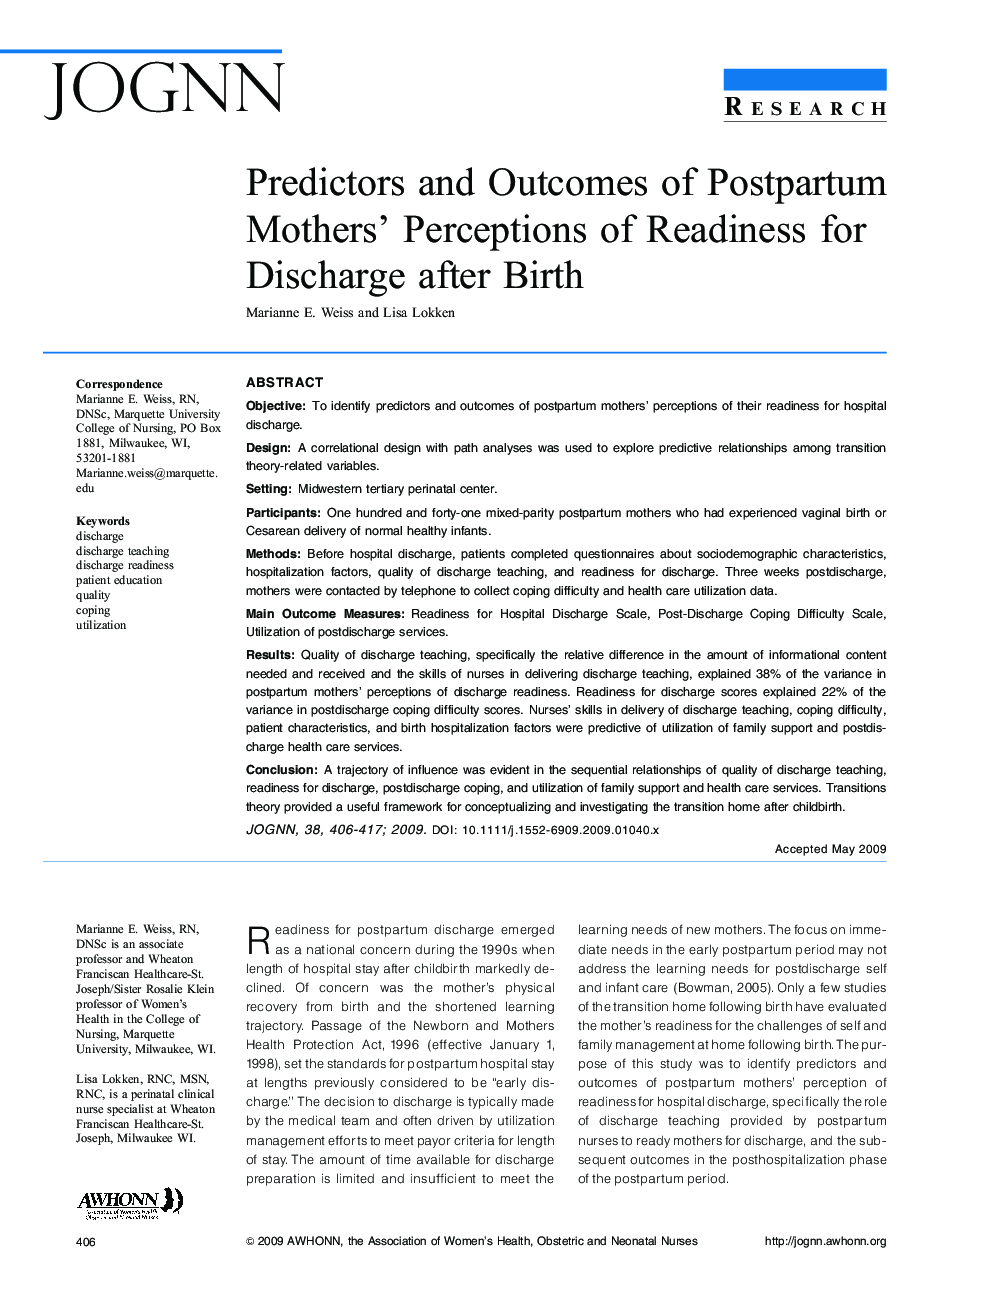 Predictors and Outcomes of Postpartum Mothers' Perceptions of Readiness for Discharge after Birth